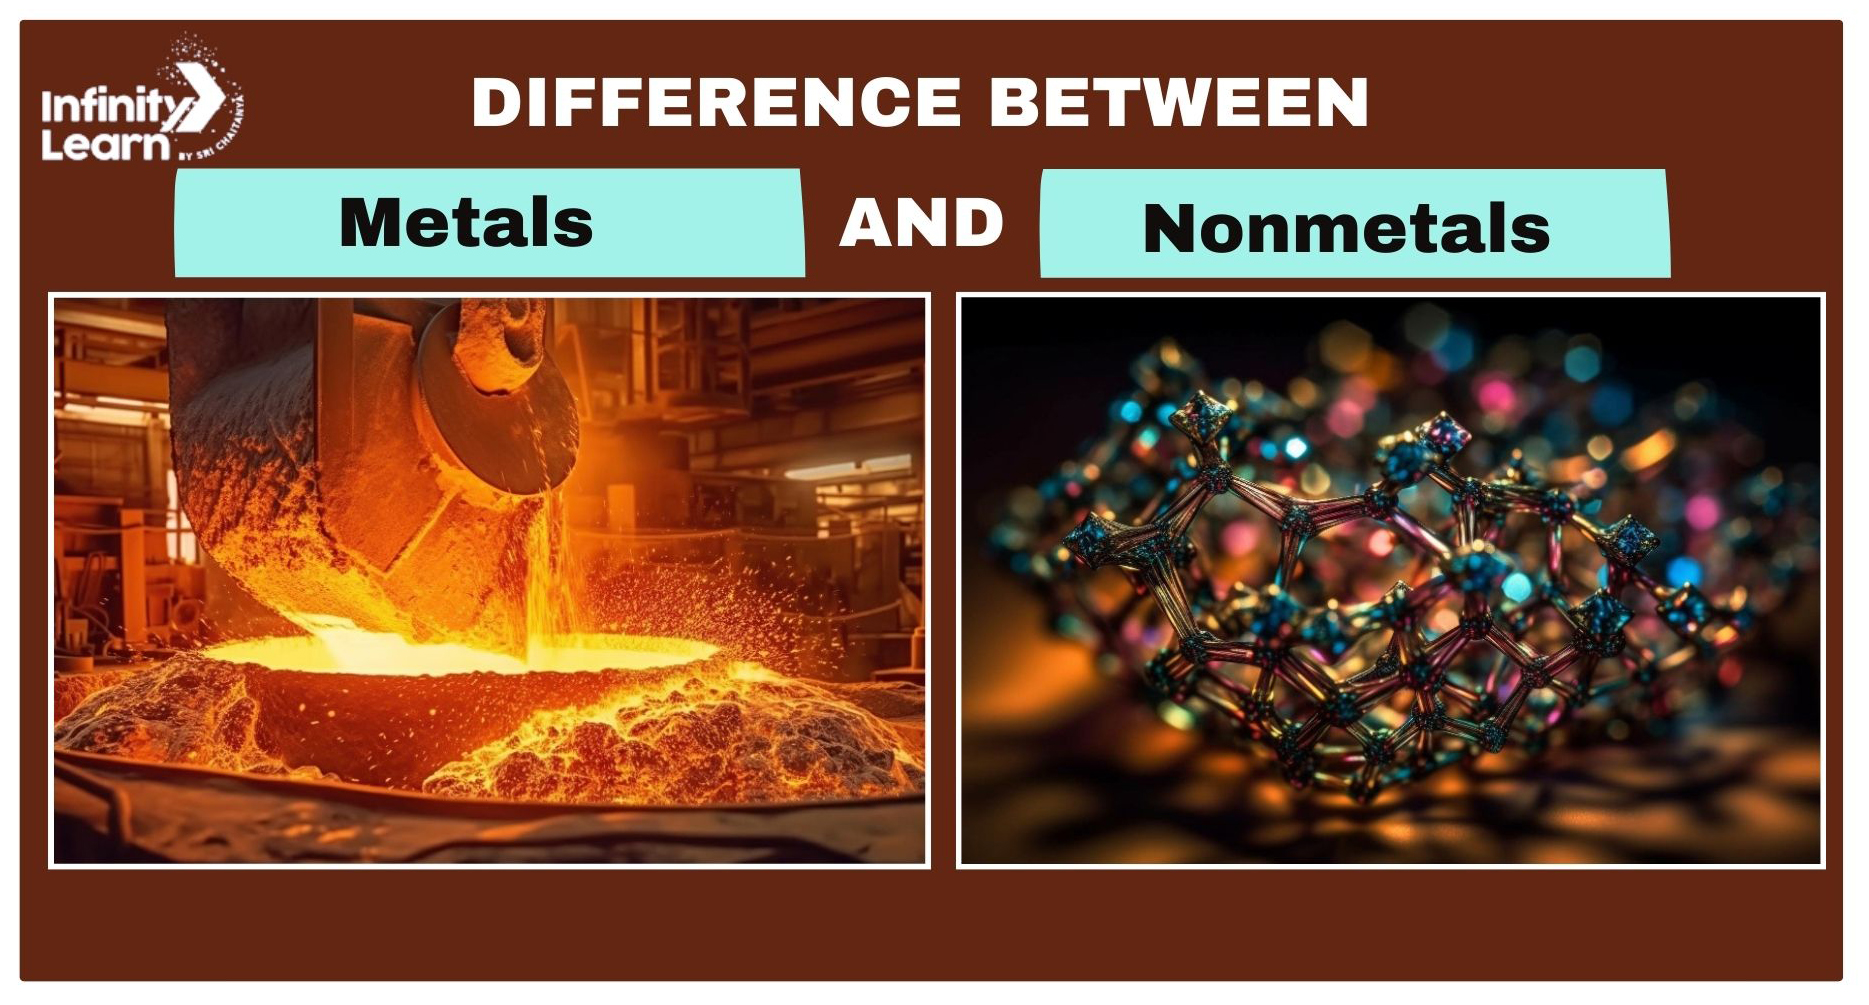 Difference Between Metals and Nonmetals